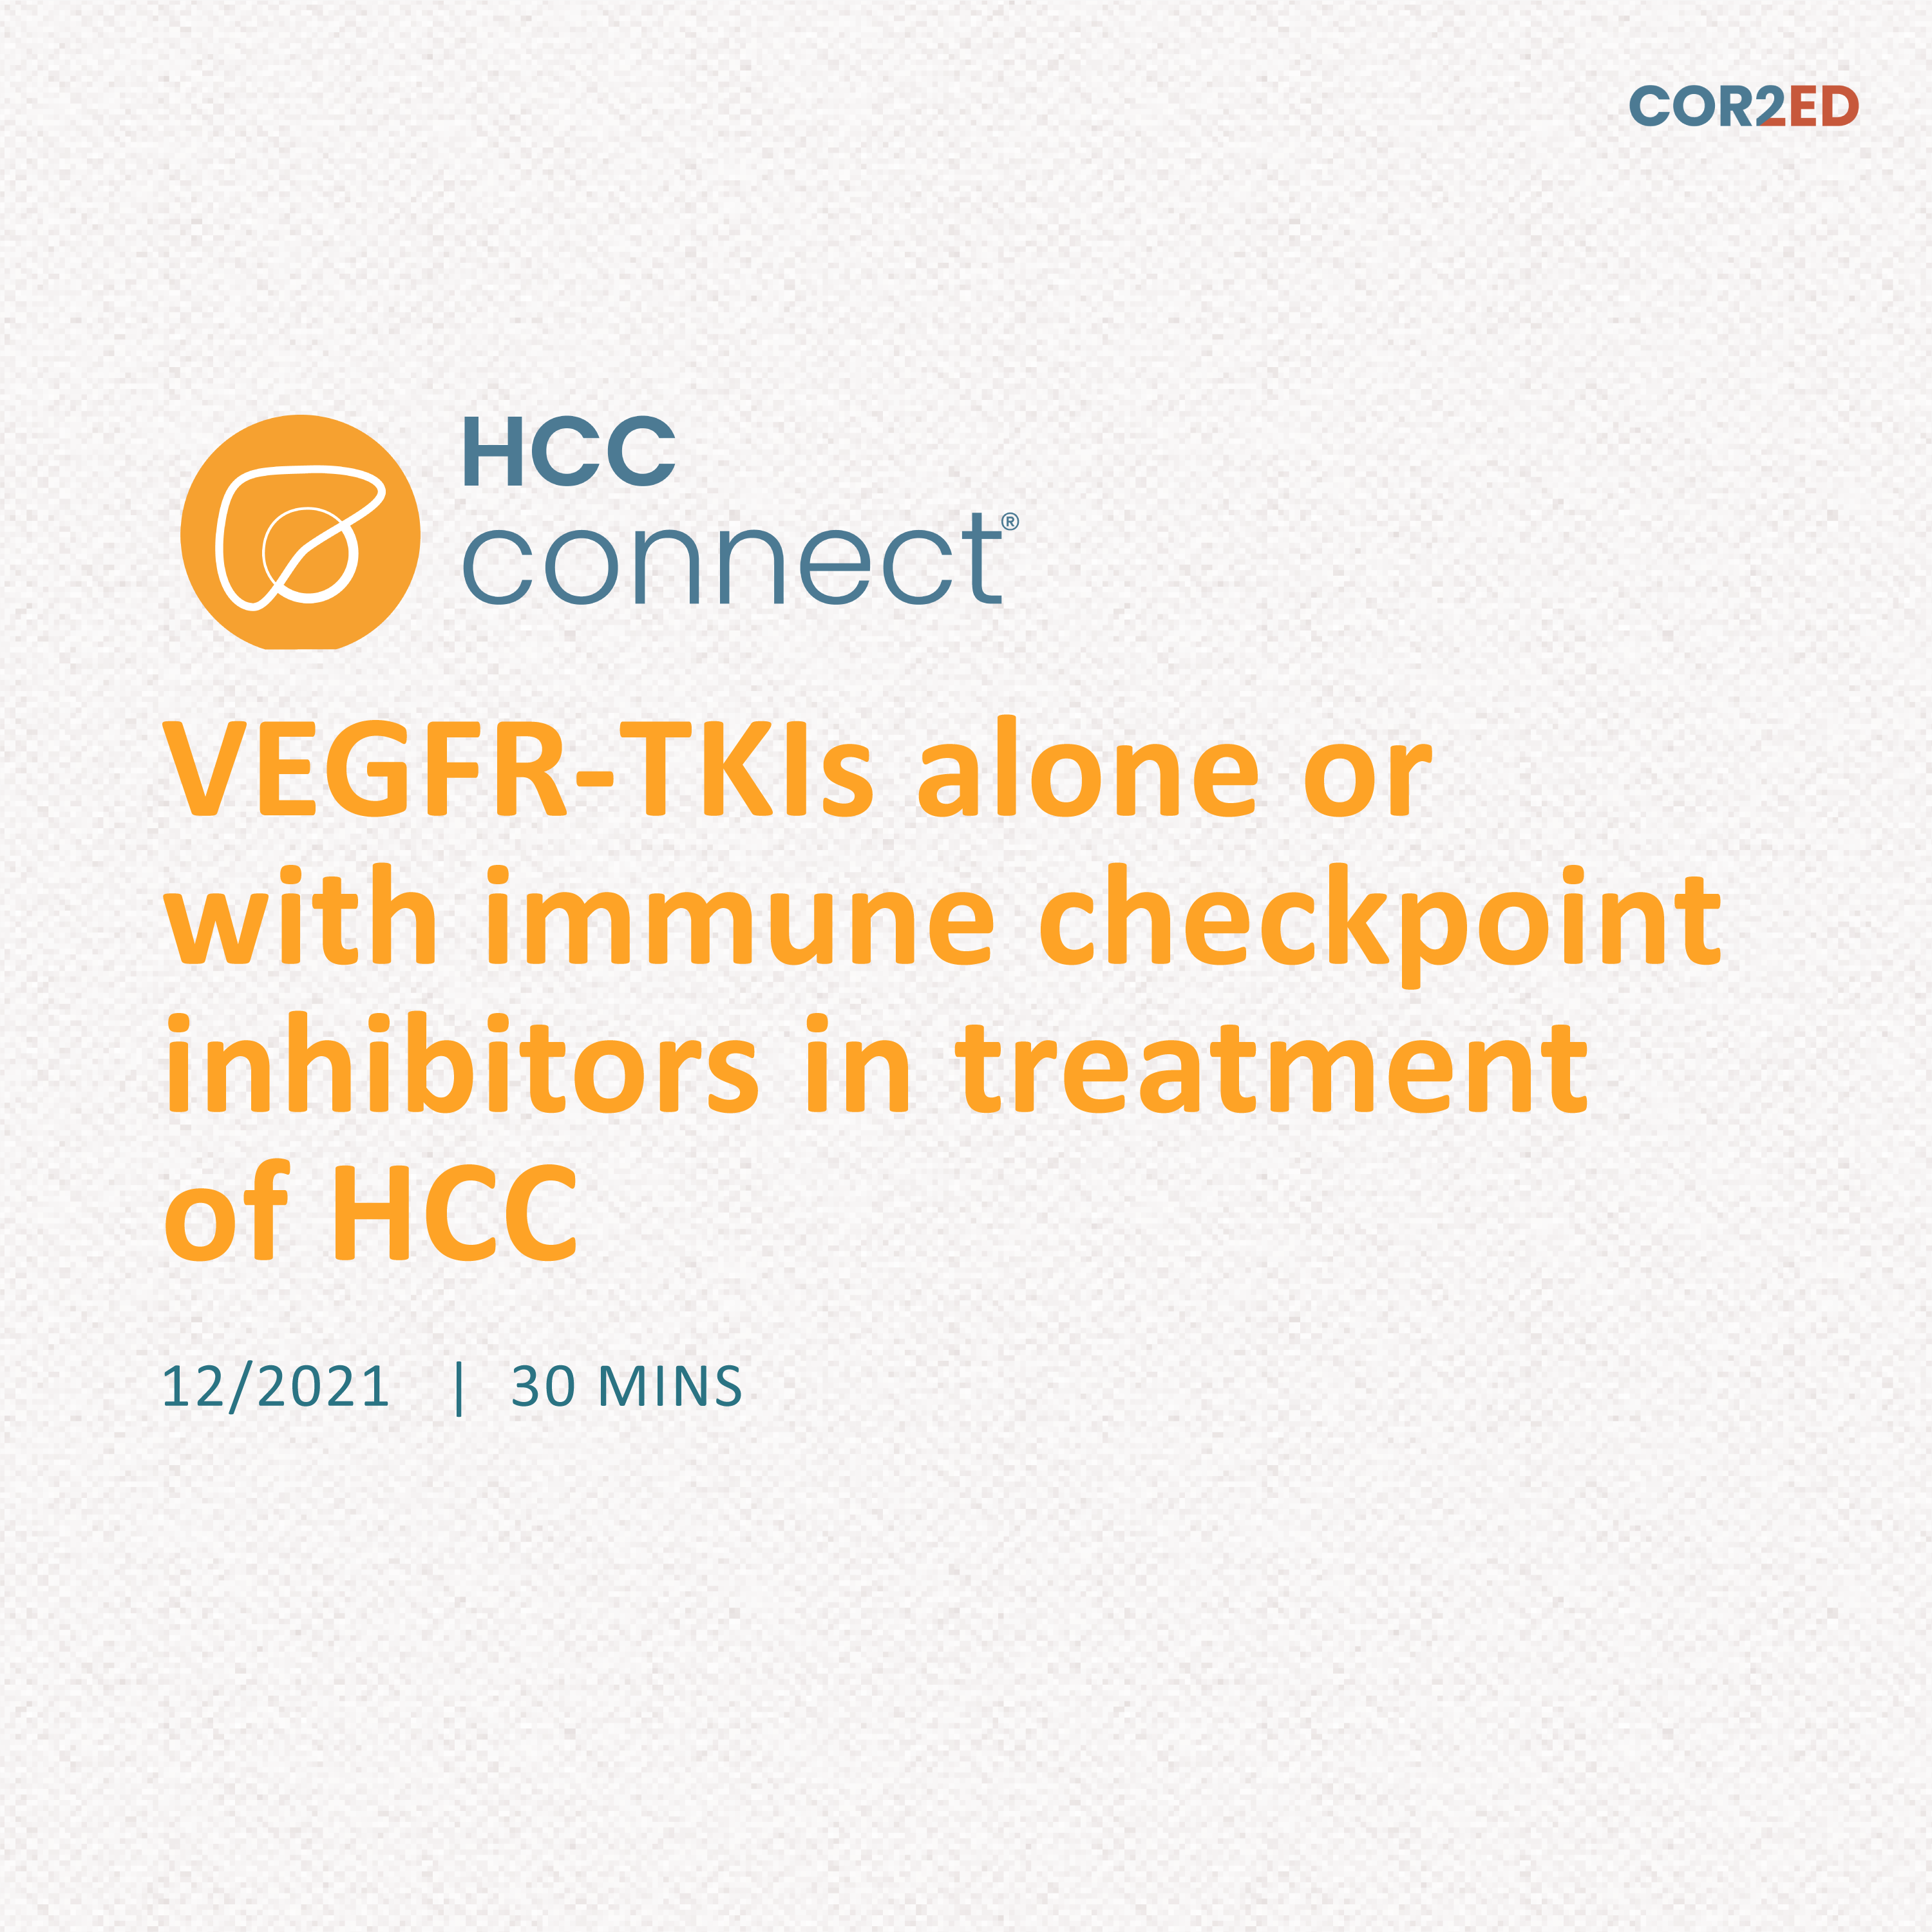 The use of VEGFR-TKIs monotherapy in the treatment of unresectable or advanced HCC in 1L setting